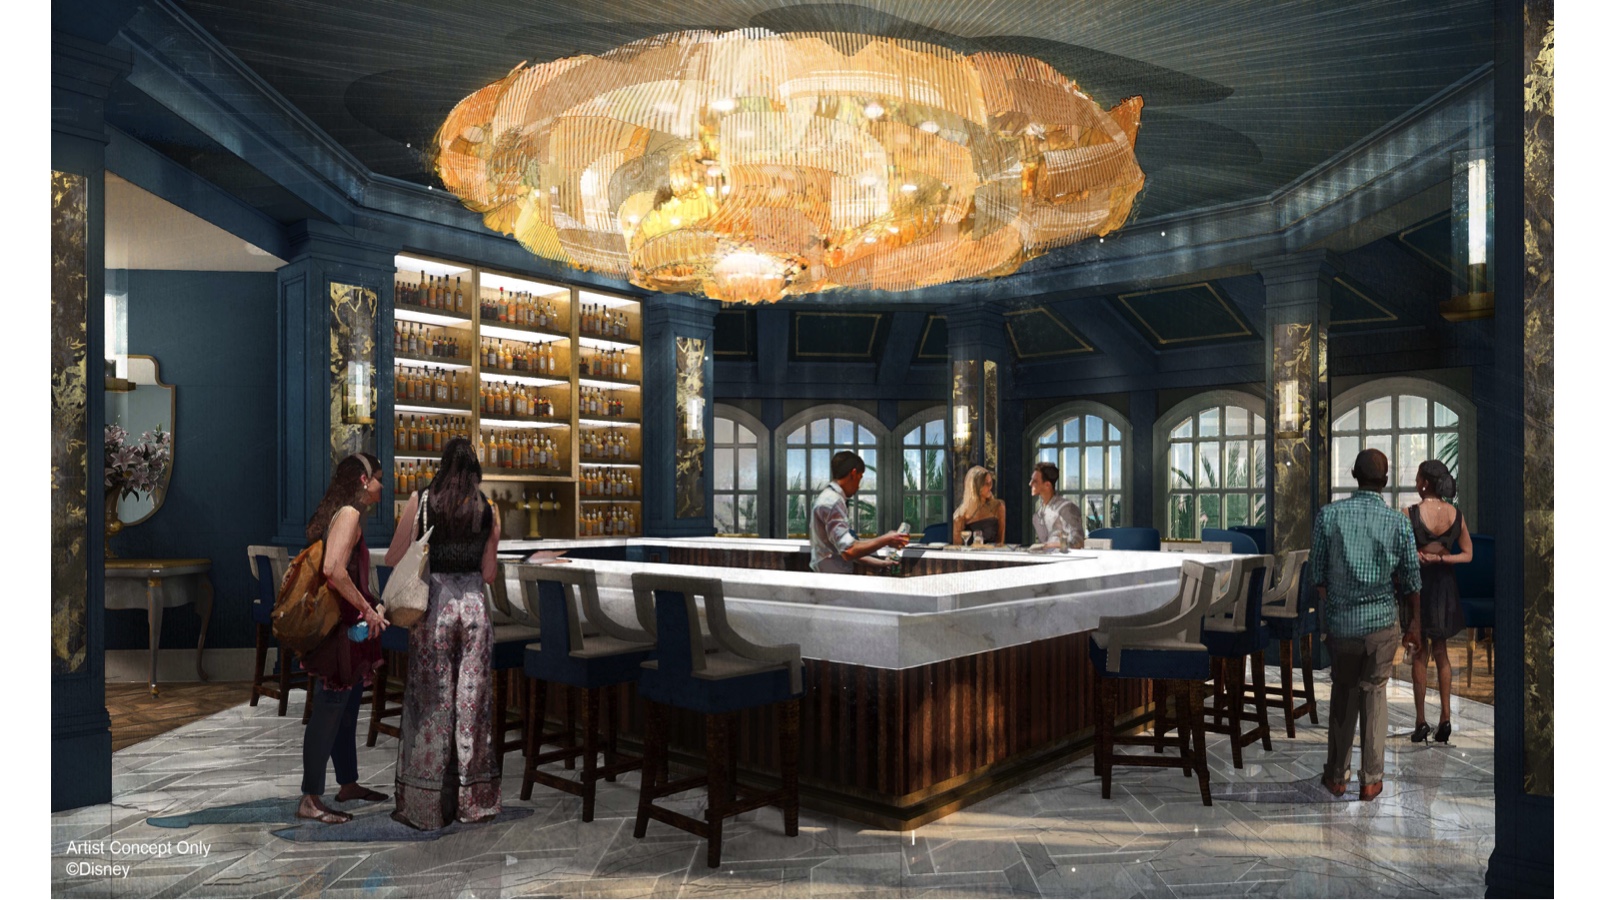 New “Beauty and the Beast” Themed Lounge at the Grand Floridian